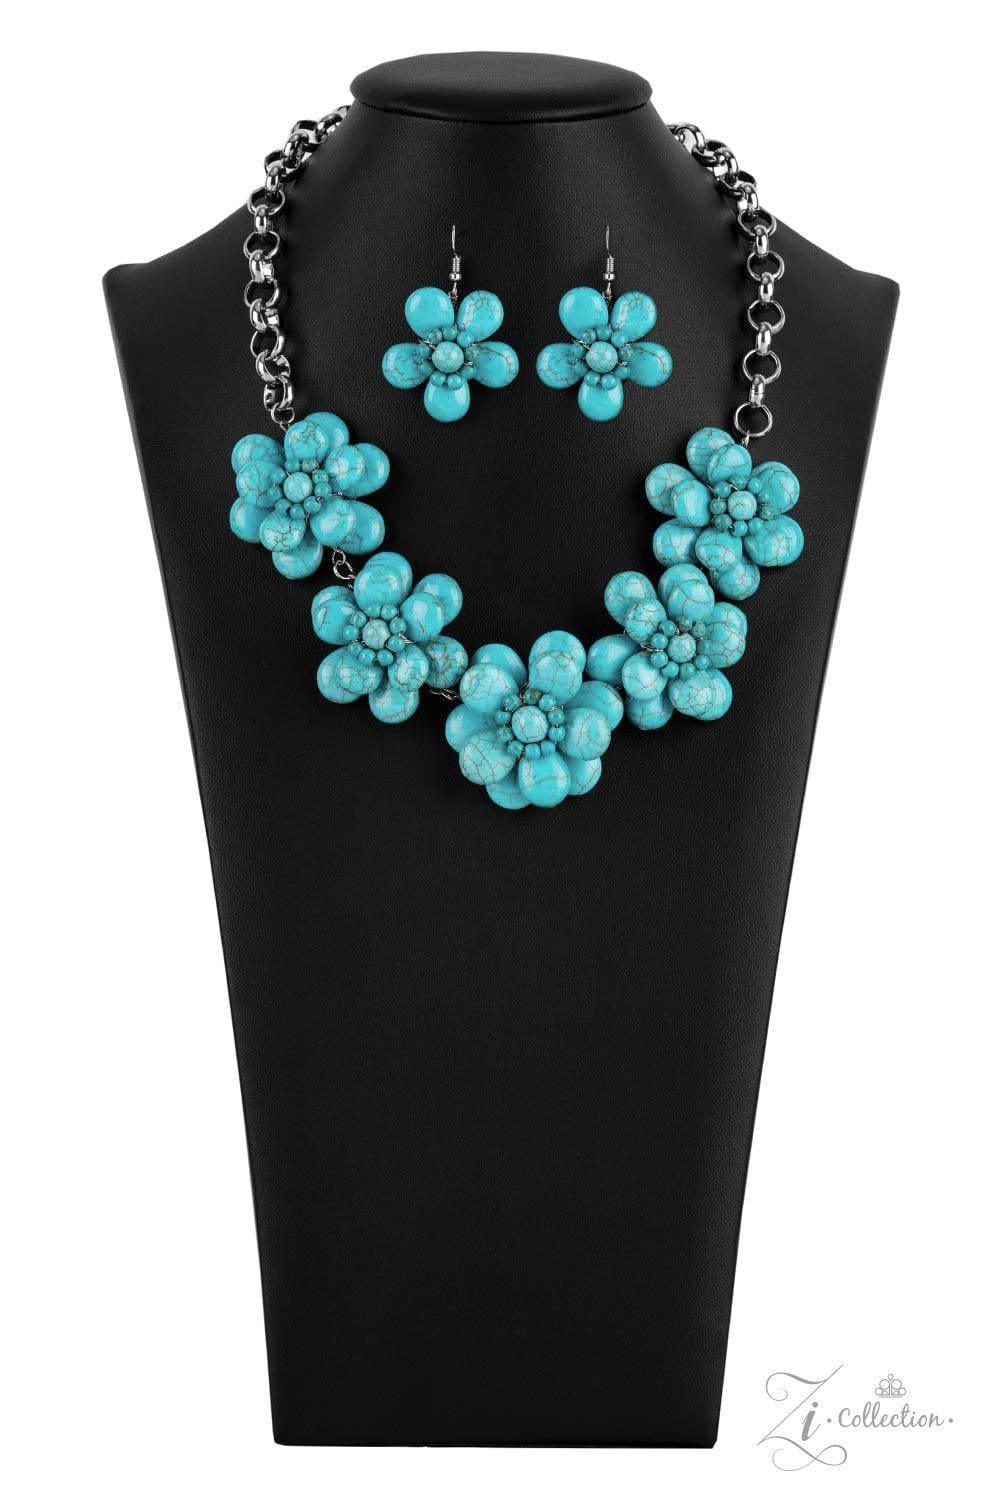 Paparazzi Accessories - Genuine - 2021 Zi Collection Necklace - Bling by JessieK